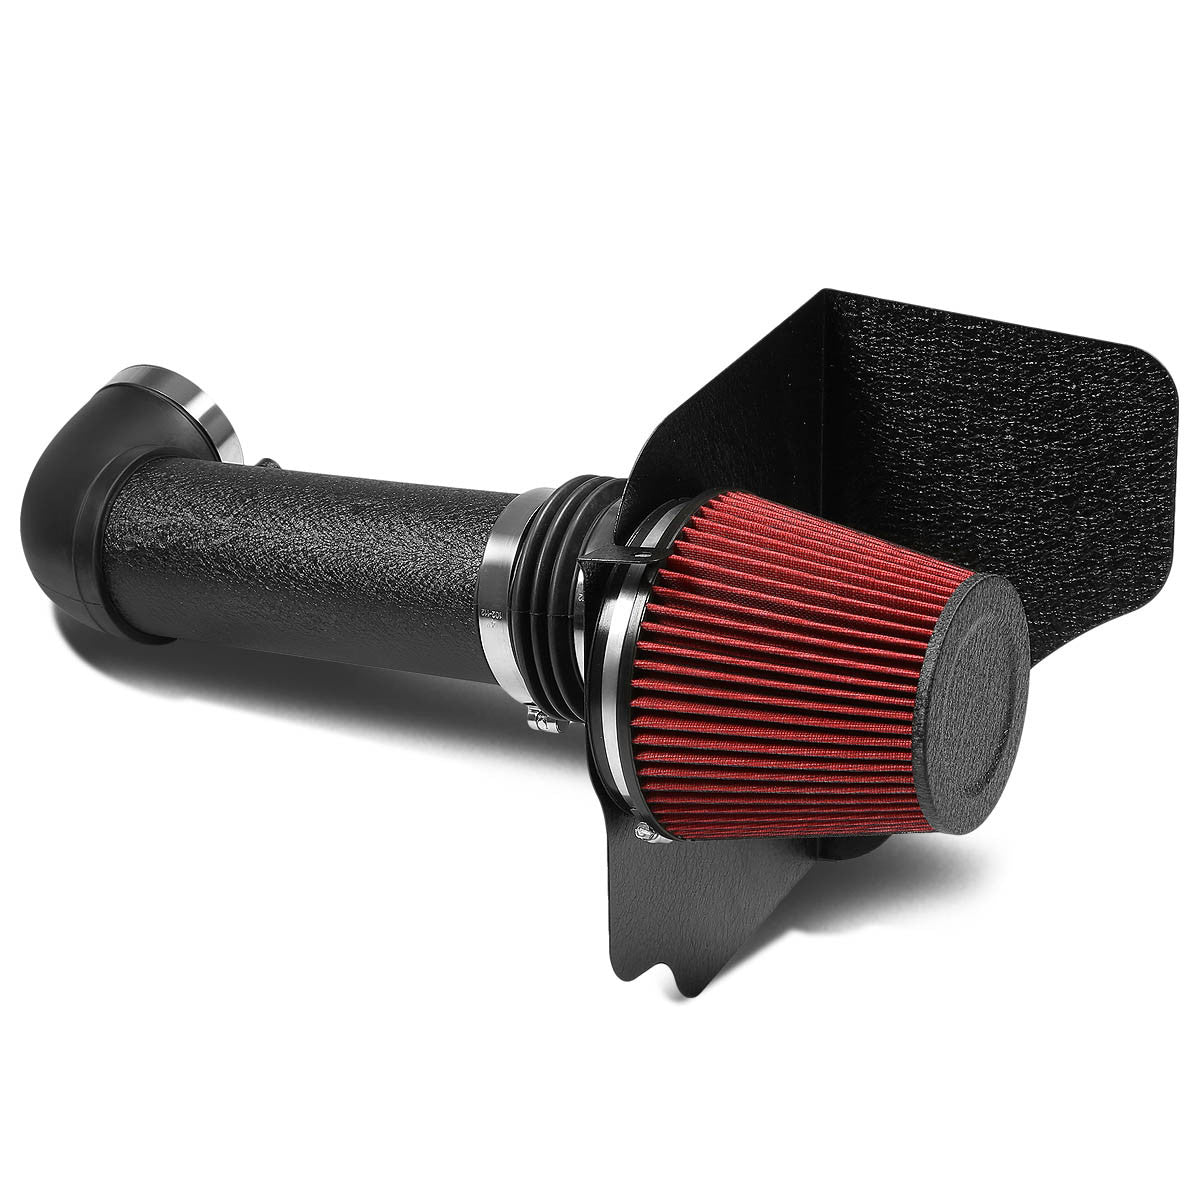 05-10 Chrysler 300 Dodge Charger 5.7L 6.1L Aluminum Cold Air Intake w/Heat Shield+Filter